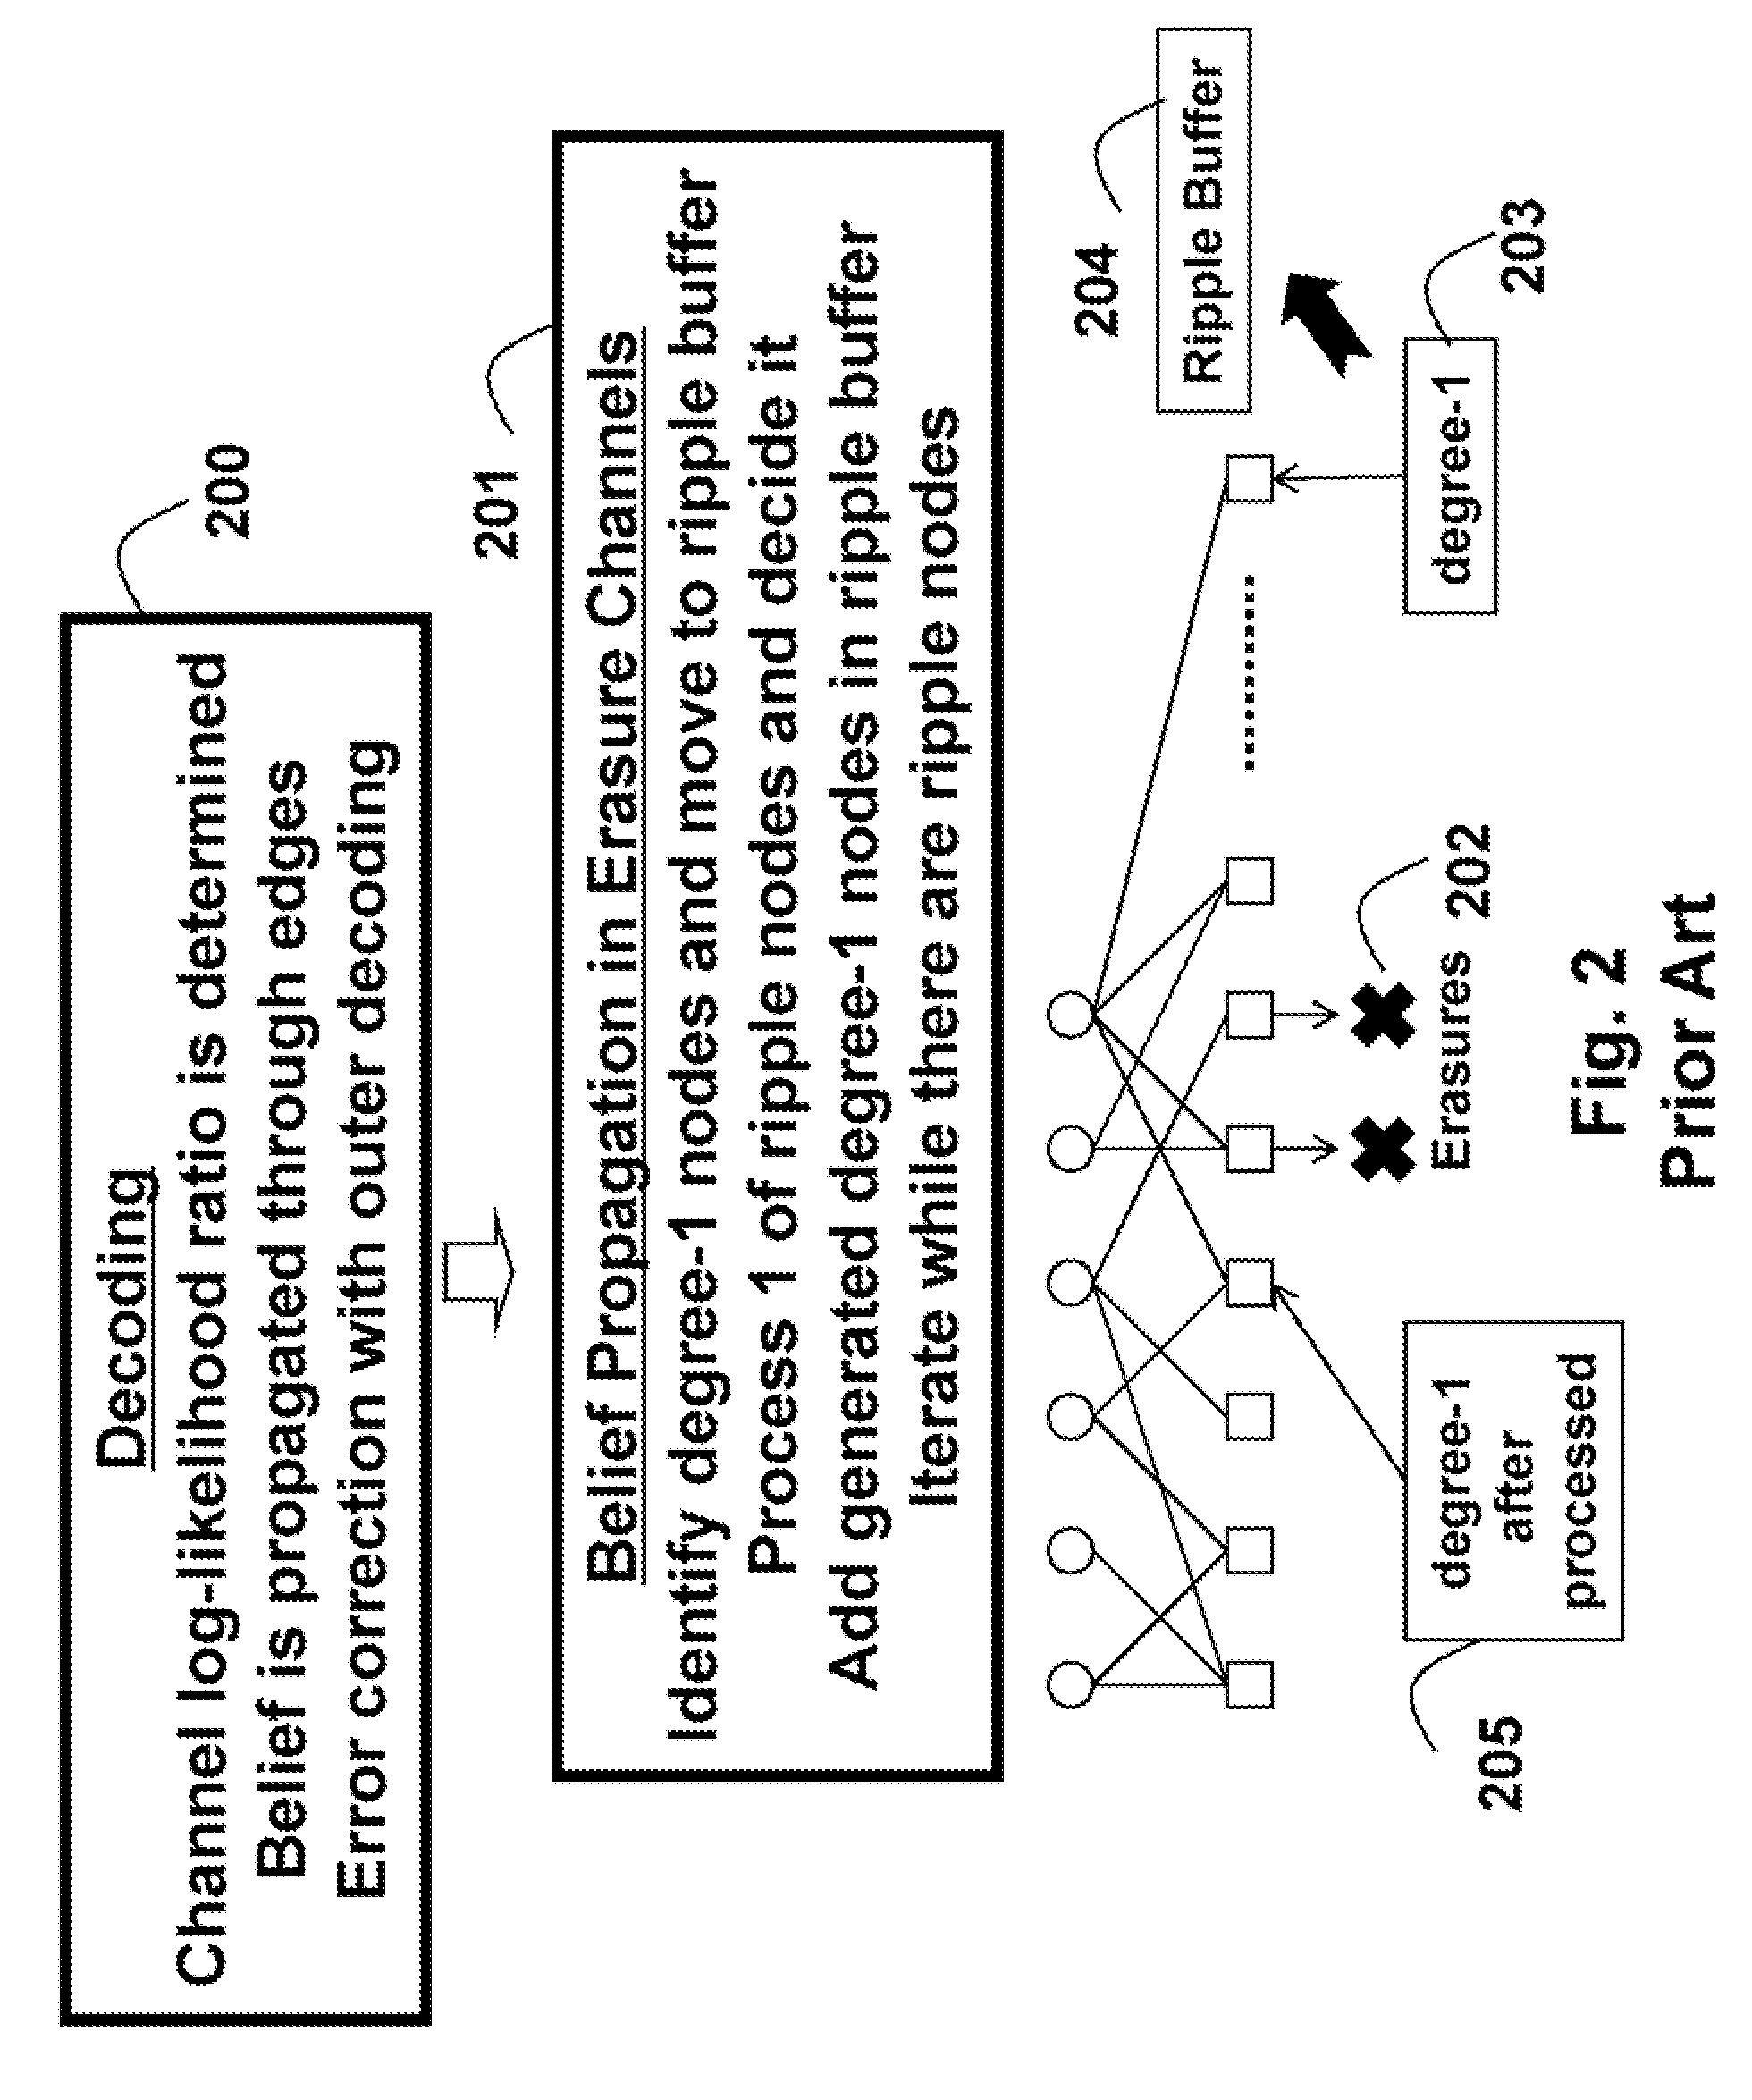 Method and system for communicating multimedia using reconfigurable rateless codes and decoding in-process status feedback